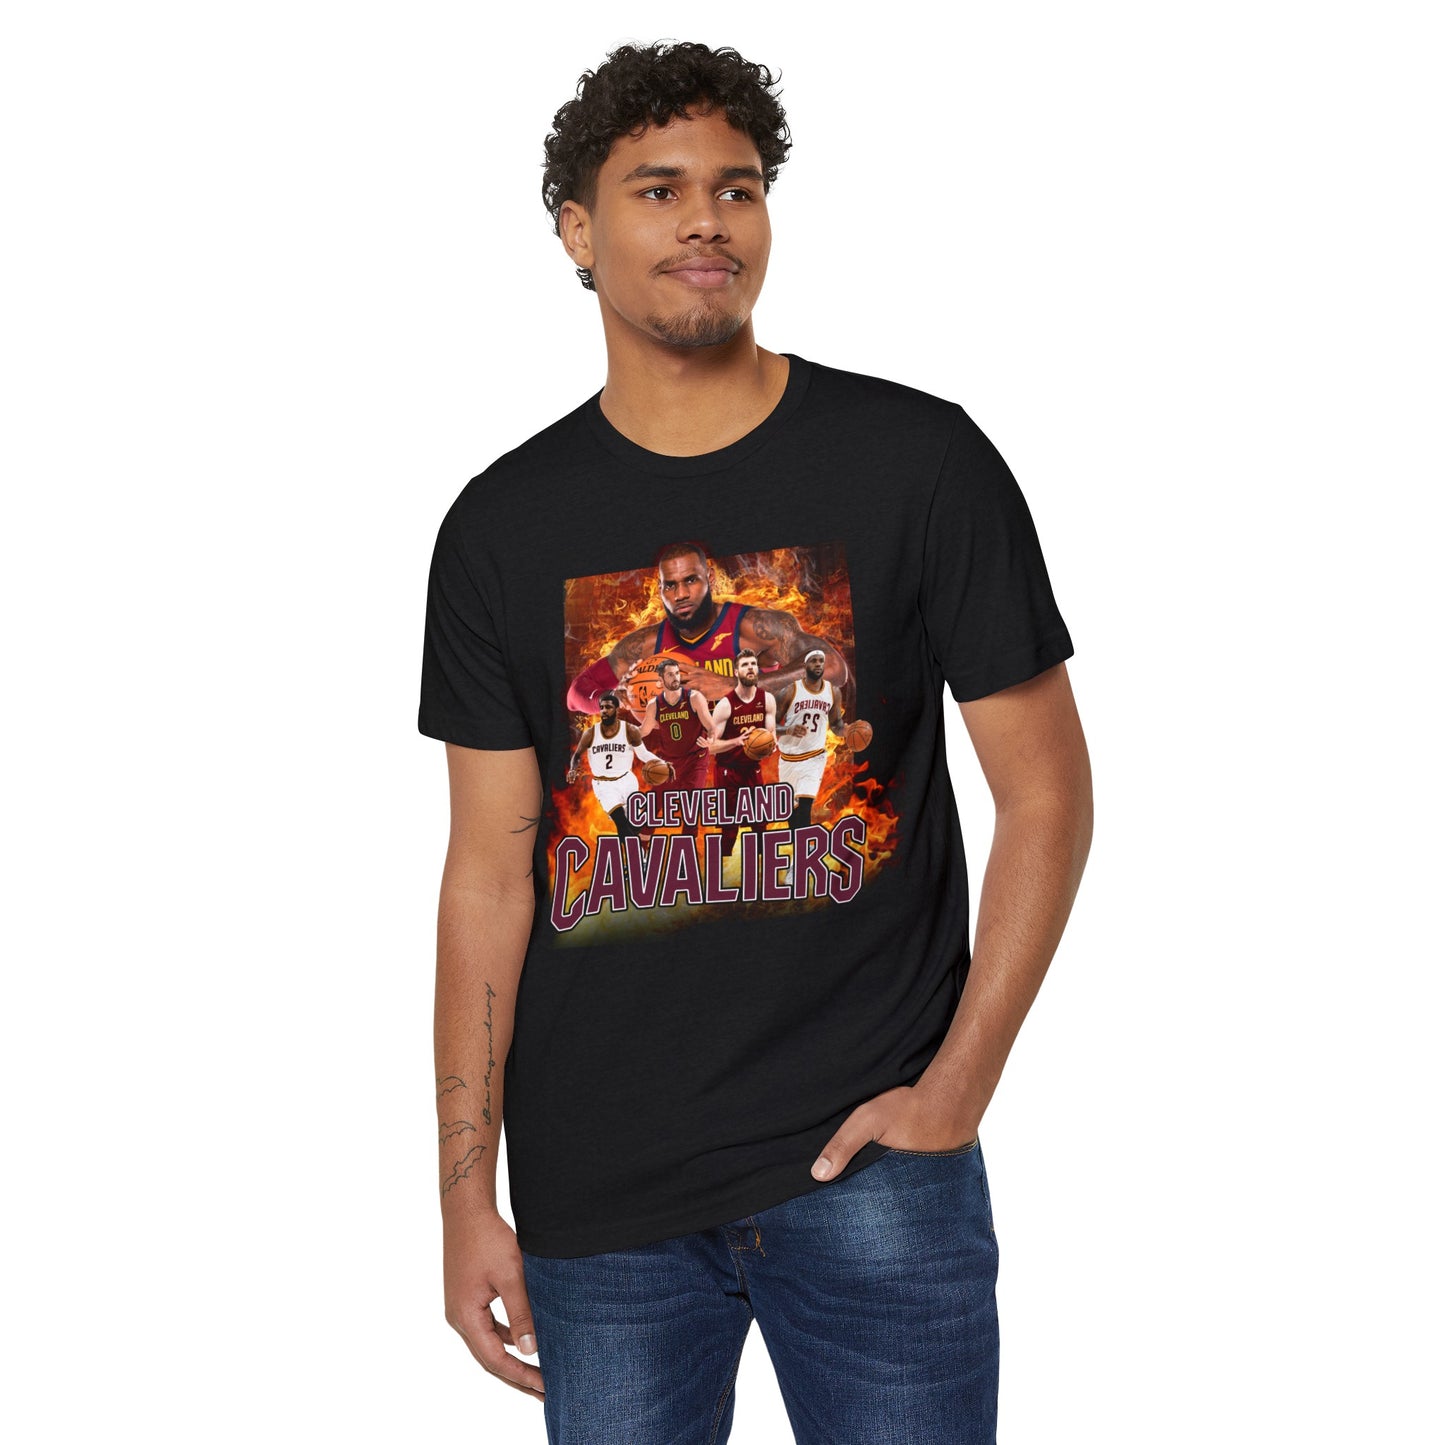 Cleveland Cavaliers High Quality Printed Unisex Heavy Cotton T-shirt